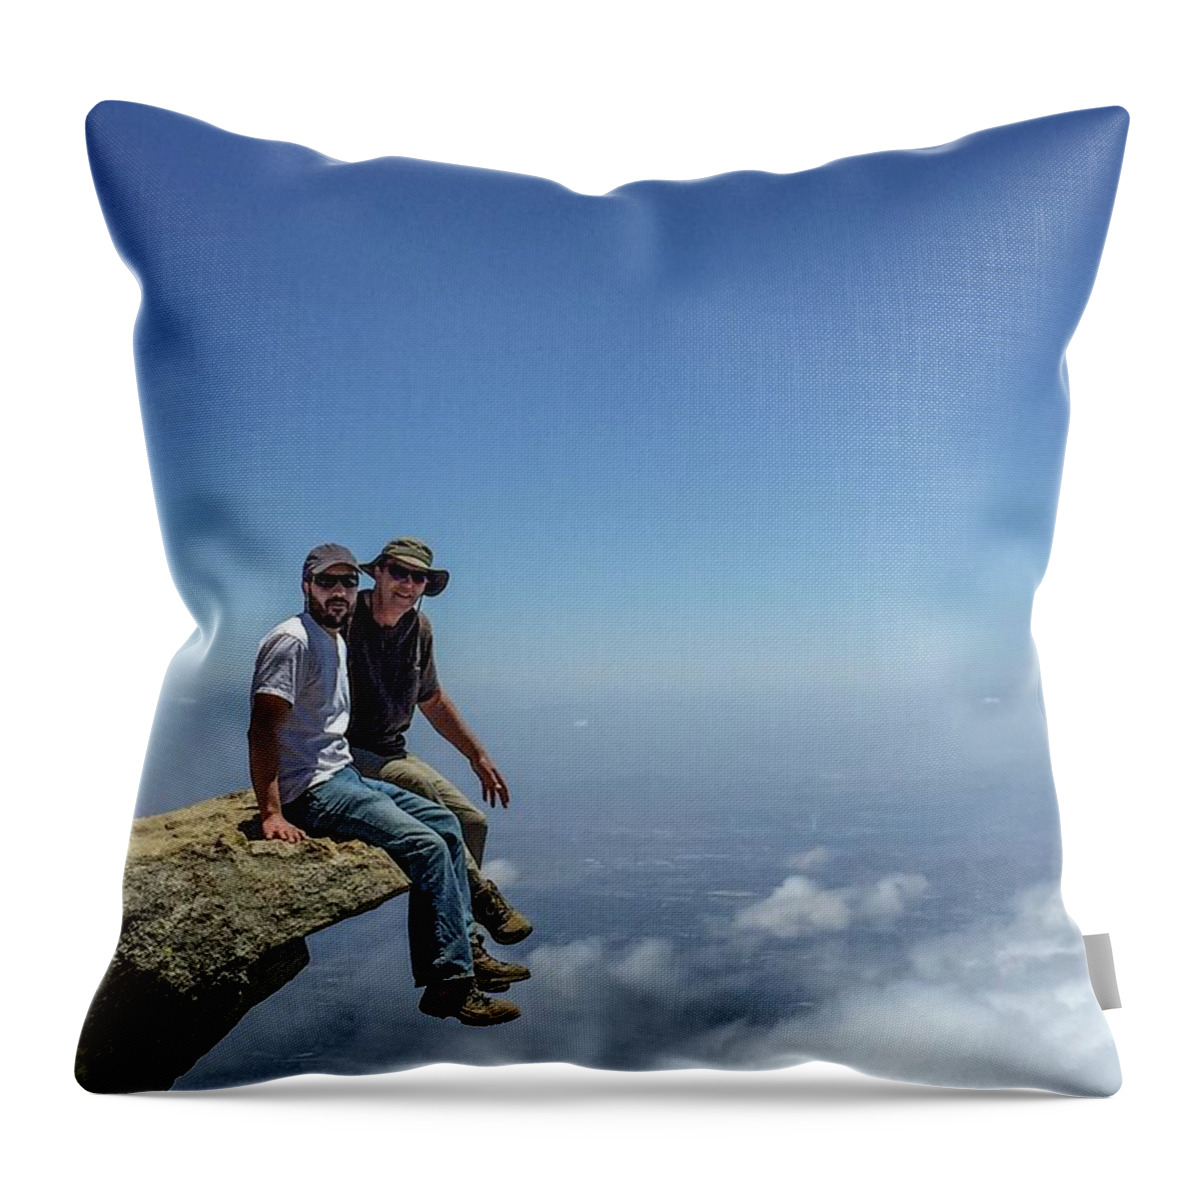 Sky Throw Pillow featuring the photograph Sitting On Top Of The World by Ed Clark